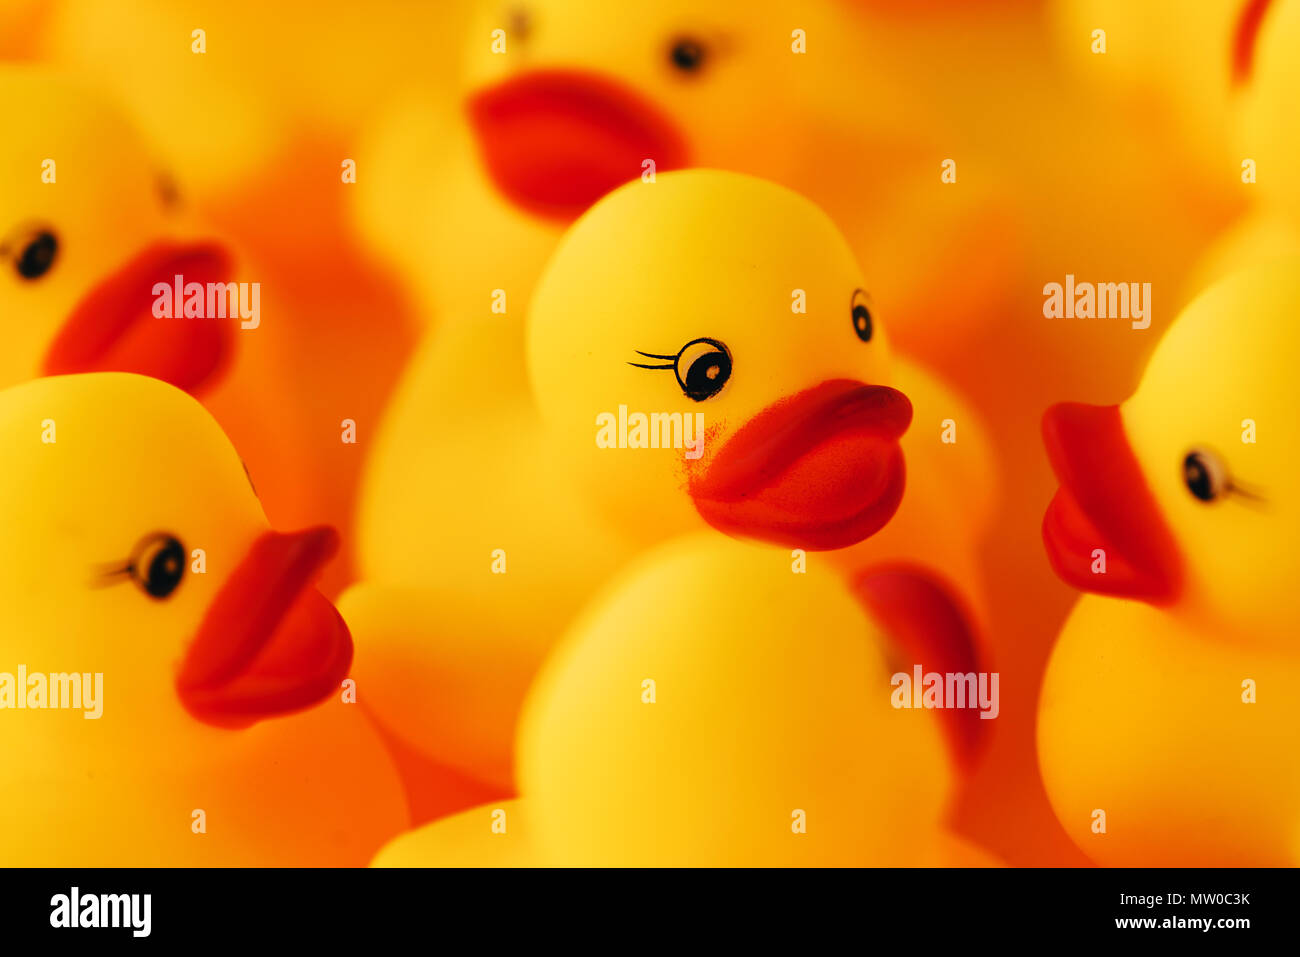 Group of rubber ducks chatting. Conceptual image of young ducklings talking to each other or gossiping for social media and networks related themes. Stock Photo